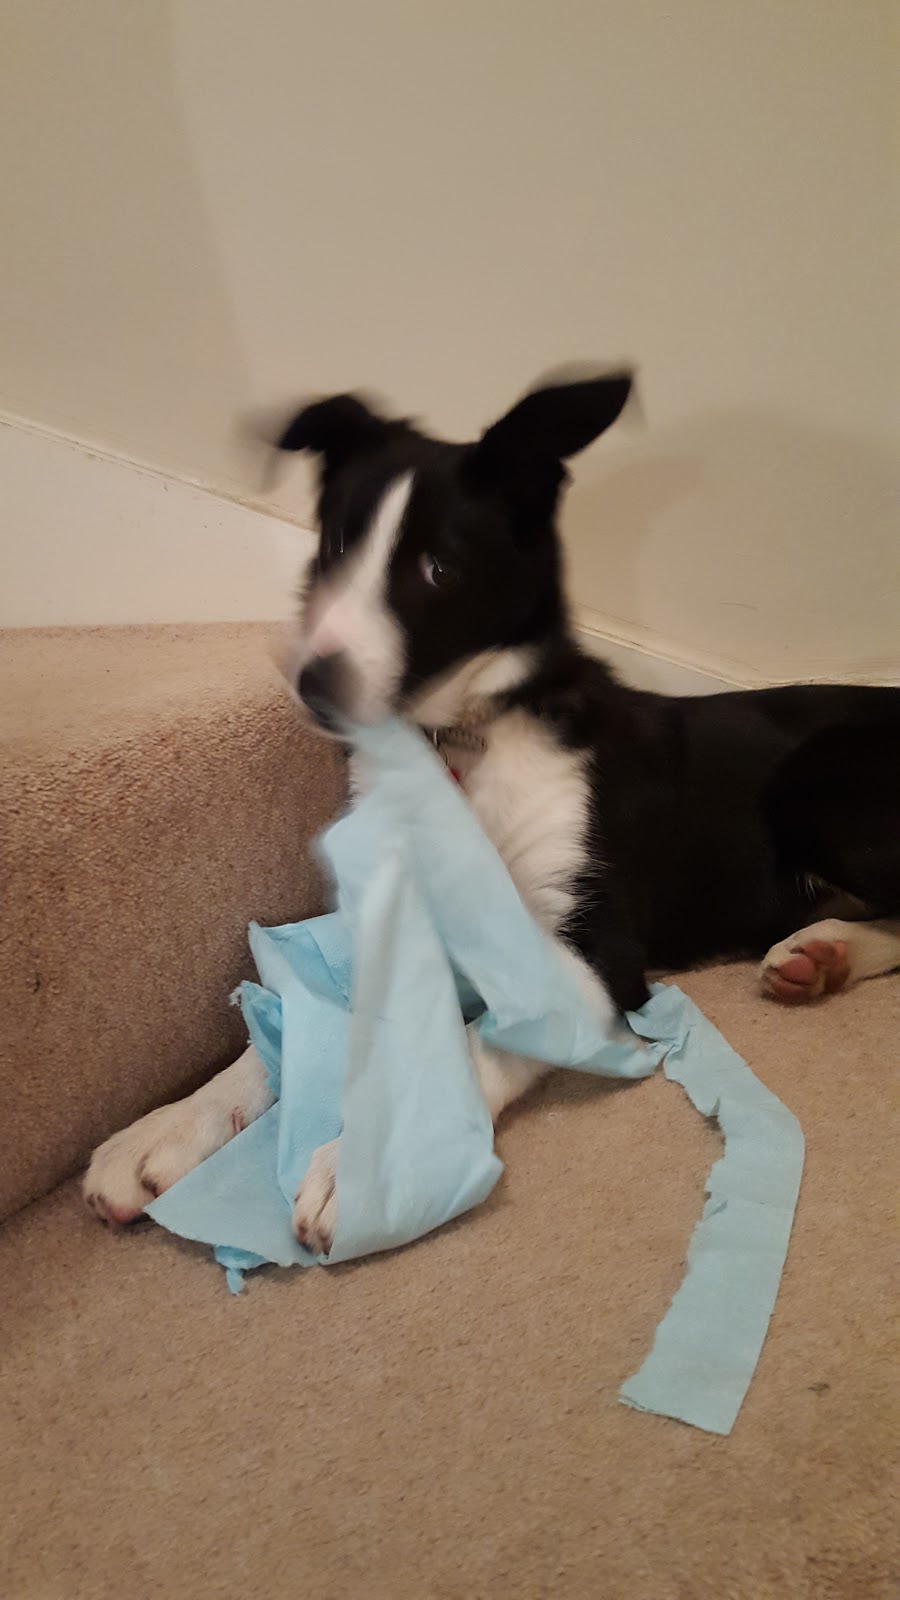 How About A Border Collie For The Next Andrex Puppy!?!